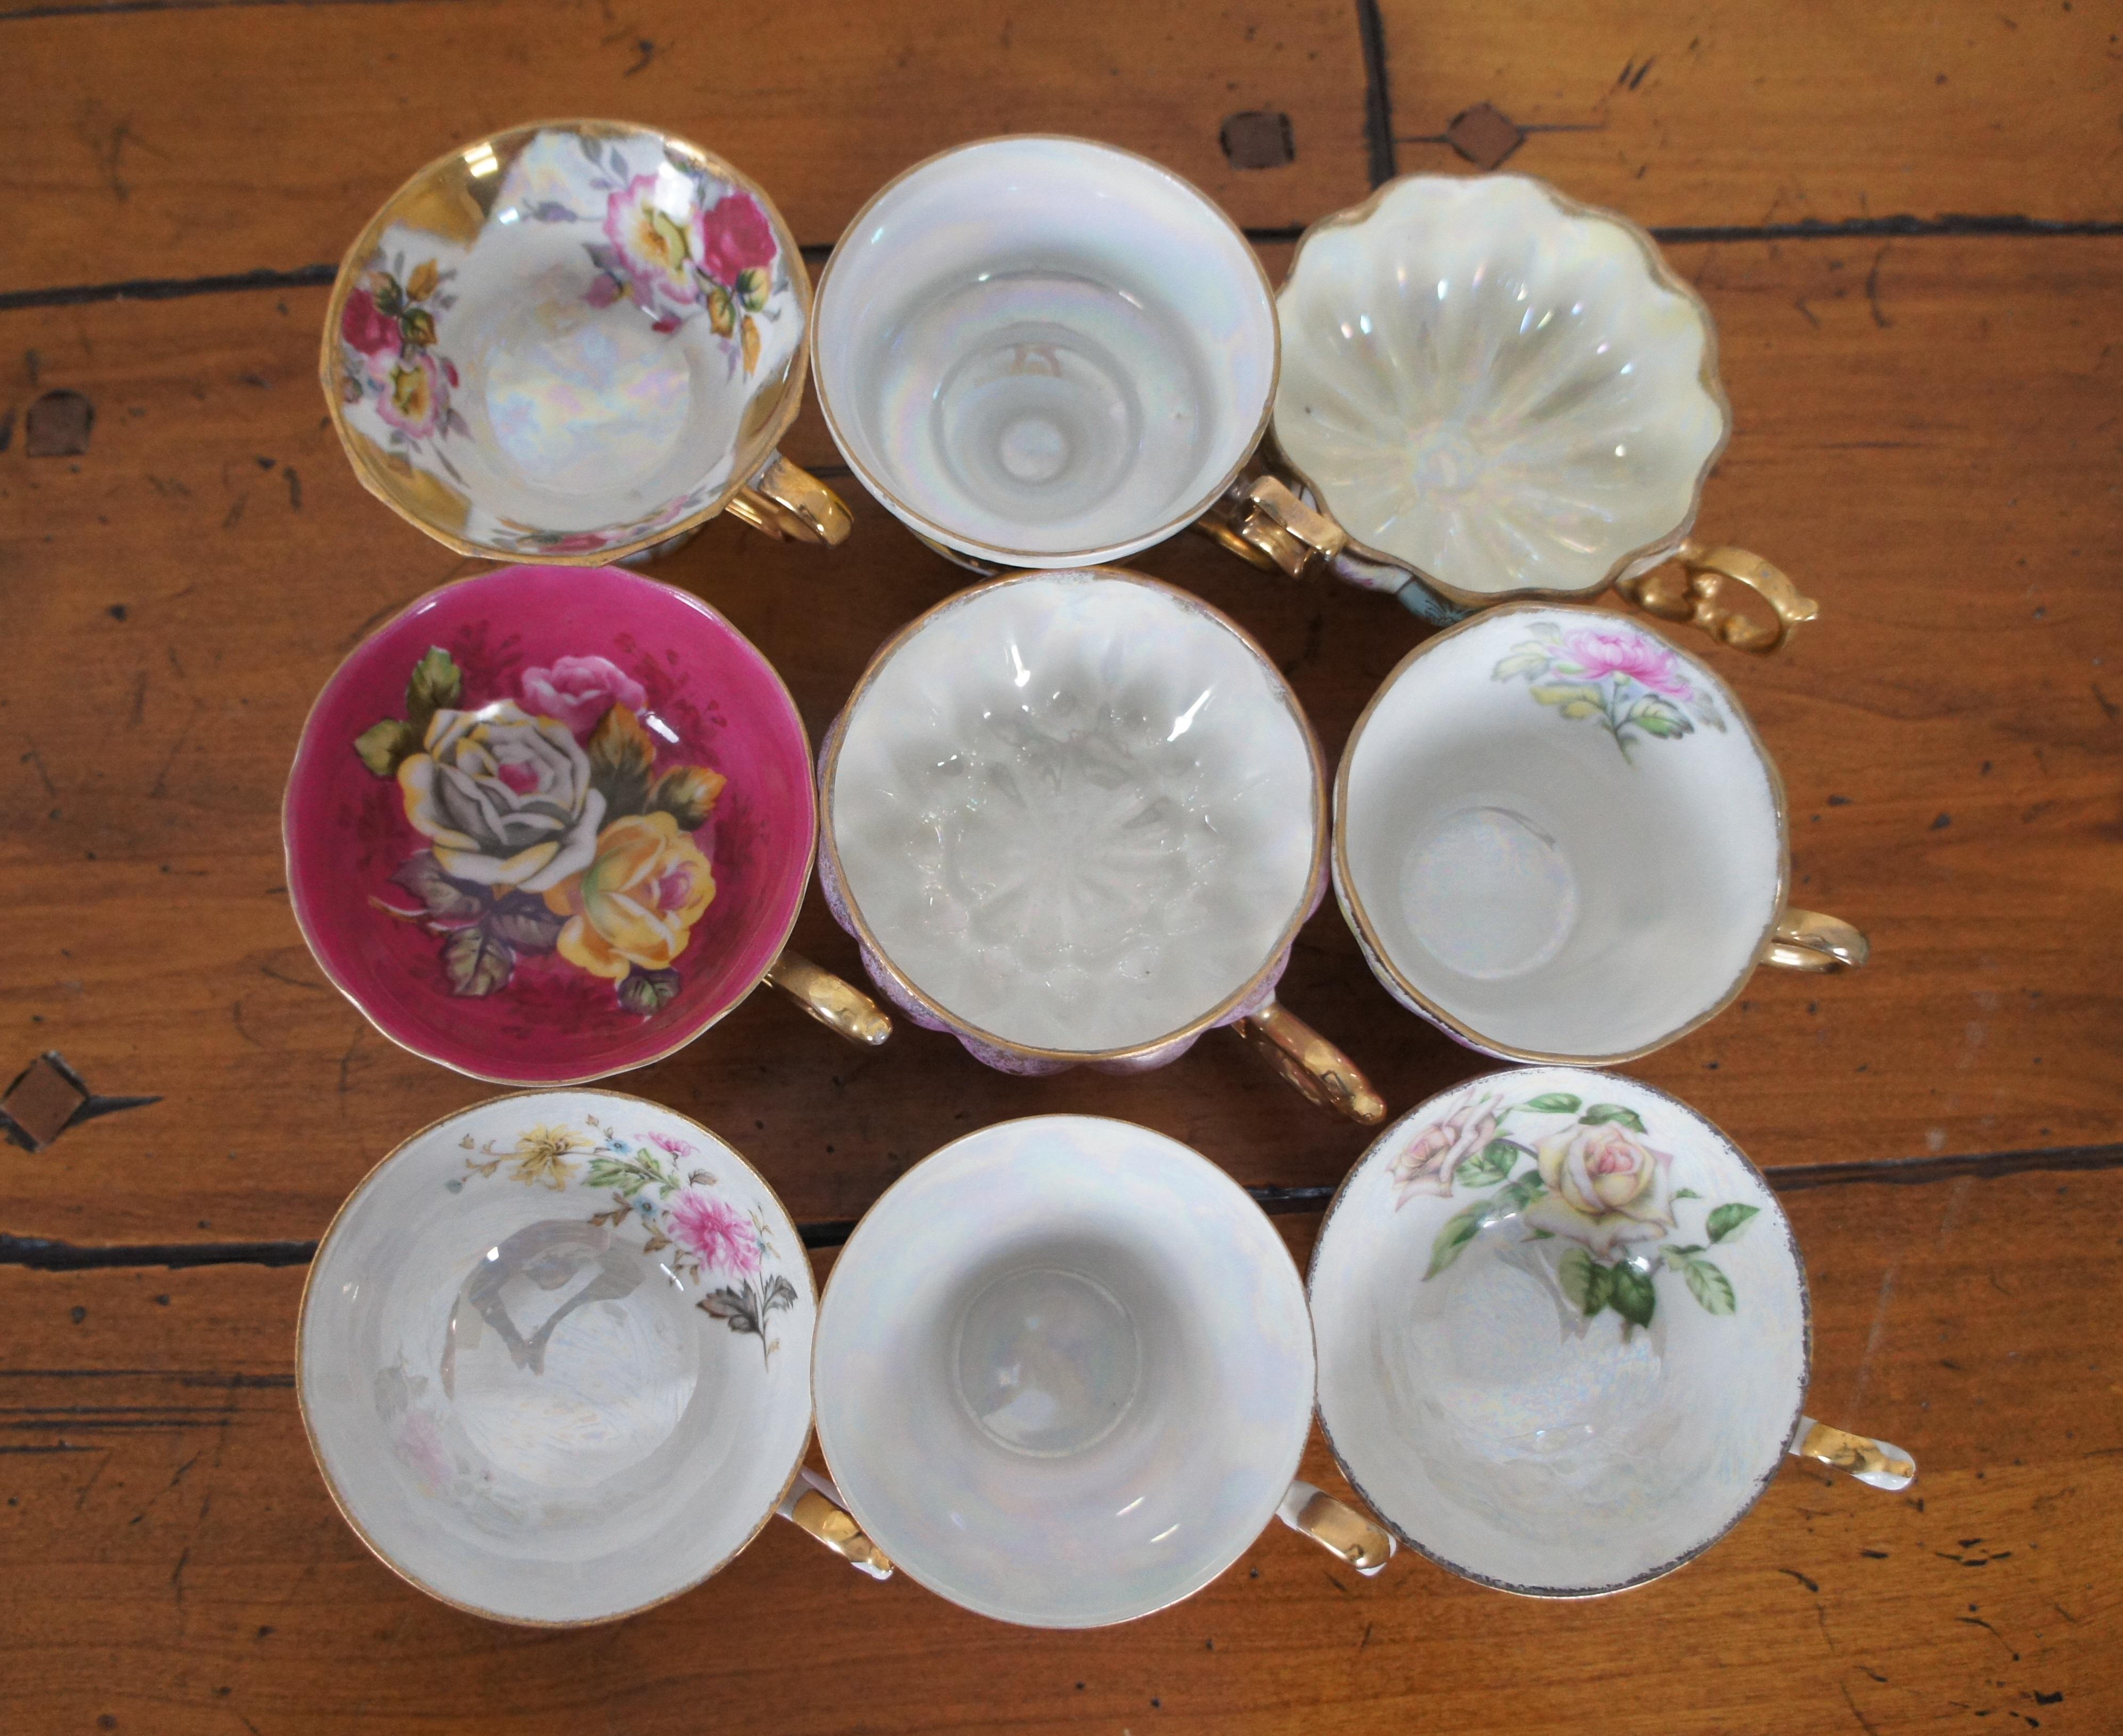 Lot of 9 Antique & Vintage Porcelain Teacups & Saucers Hand Painted Reticulated 2